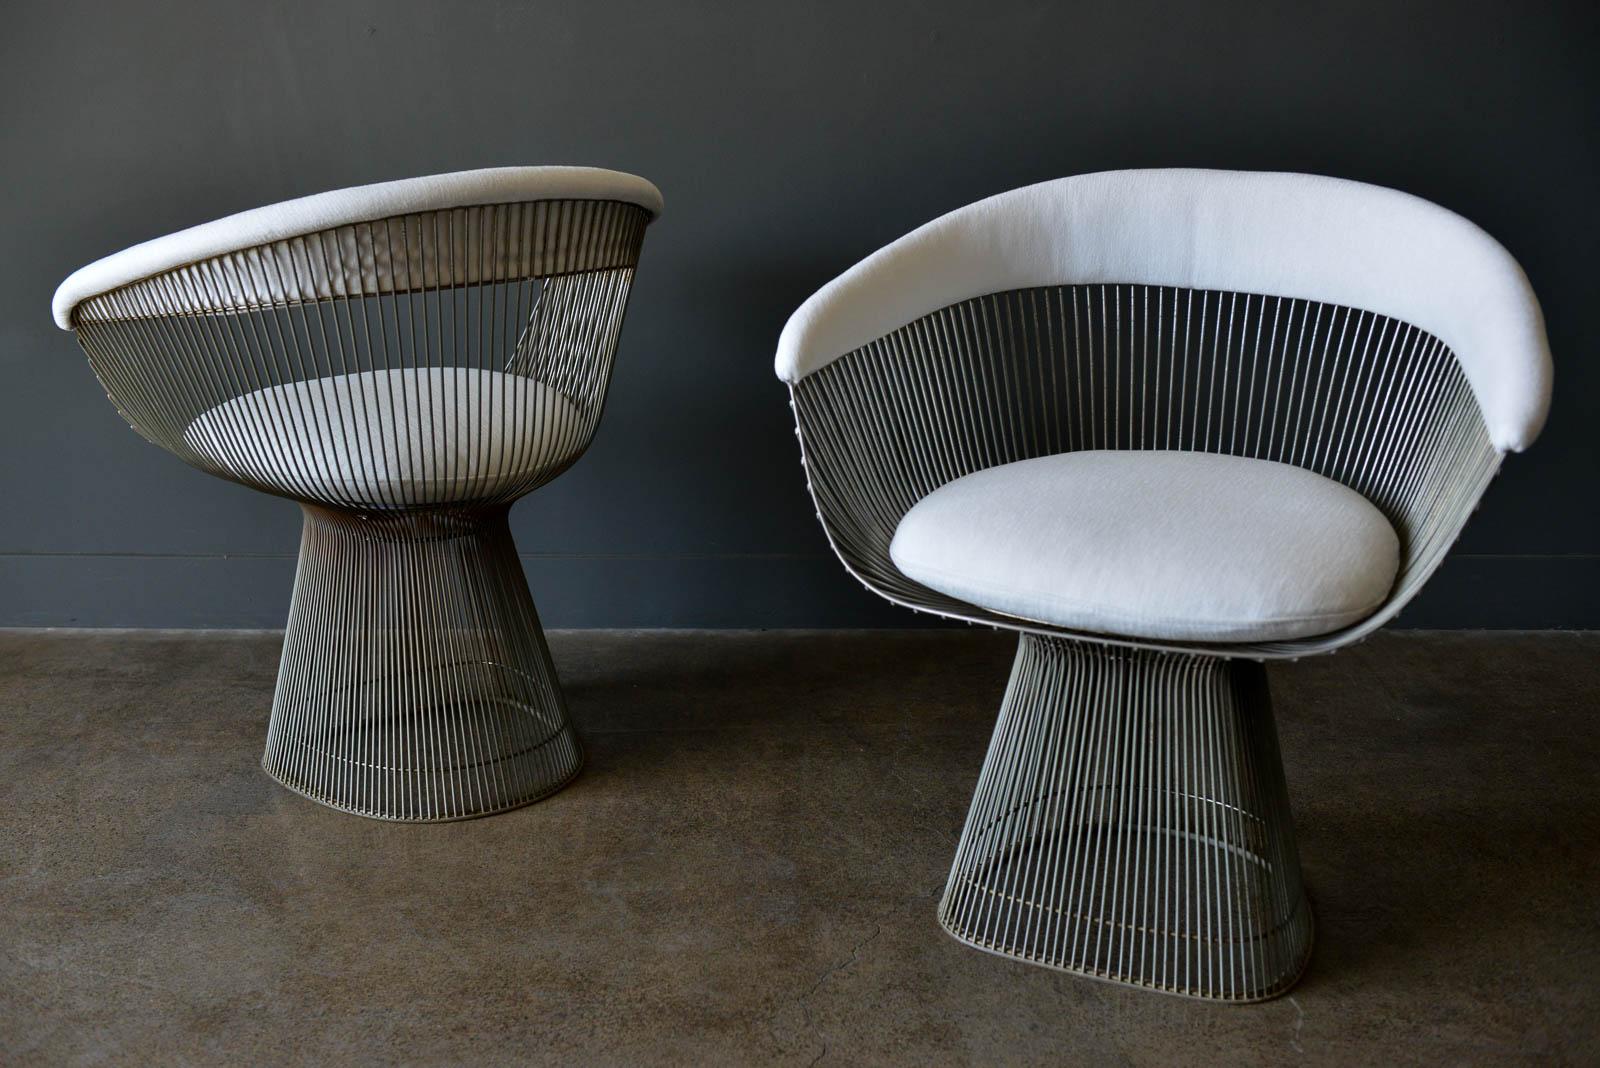 Pair of Warren Platner for Knoll Armchairs, ca. 1970. Nickel plated steel frames with newly upholstered cushions and backrest in beautiful ivory tweed. Classic and elegant design, these are original pieces with slight patina to the frames, but in